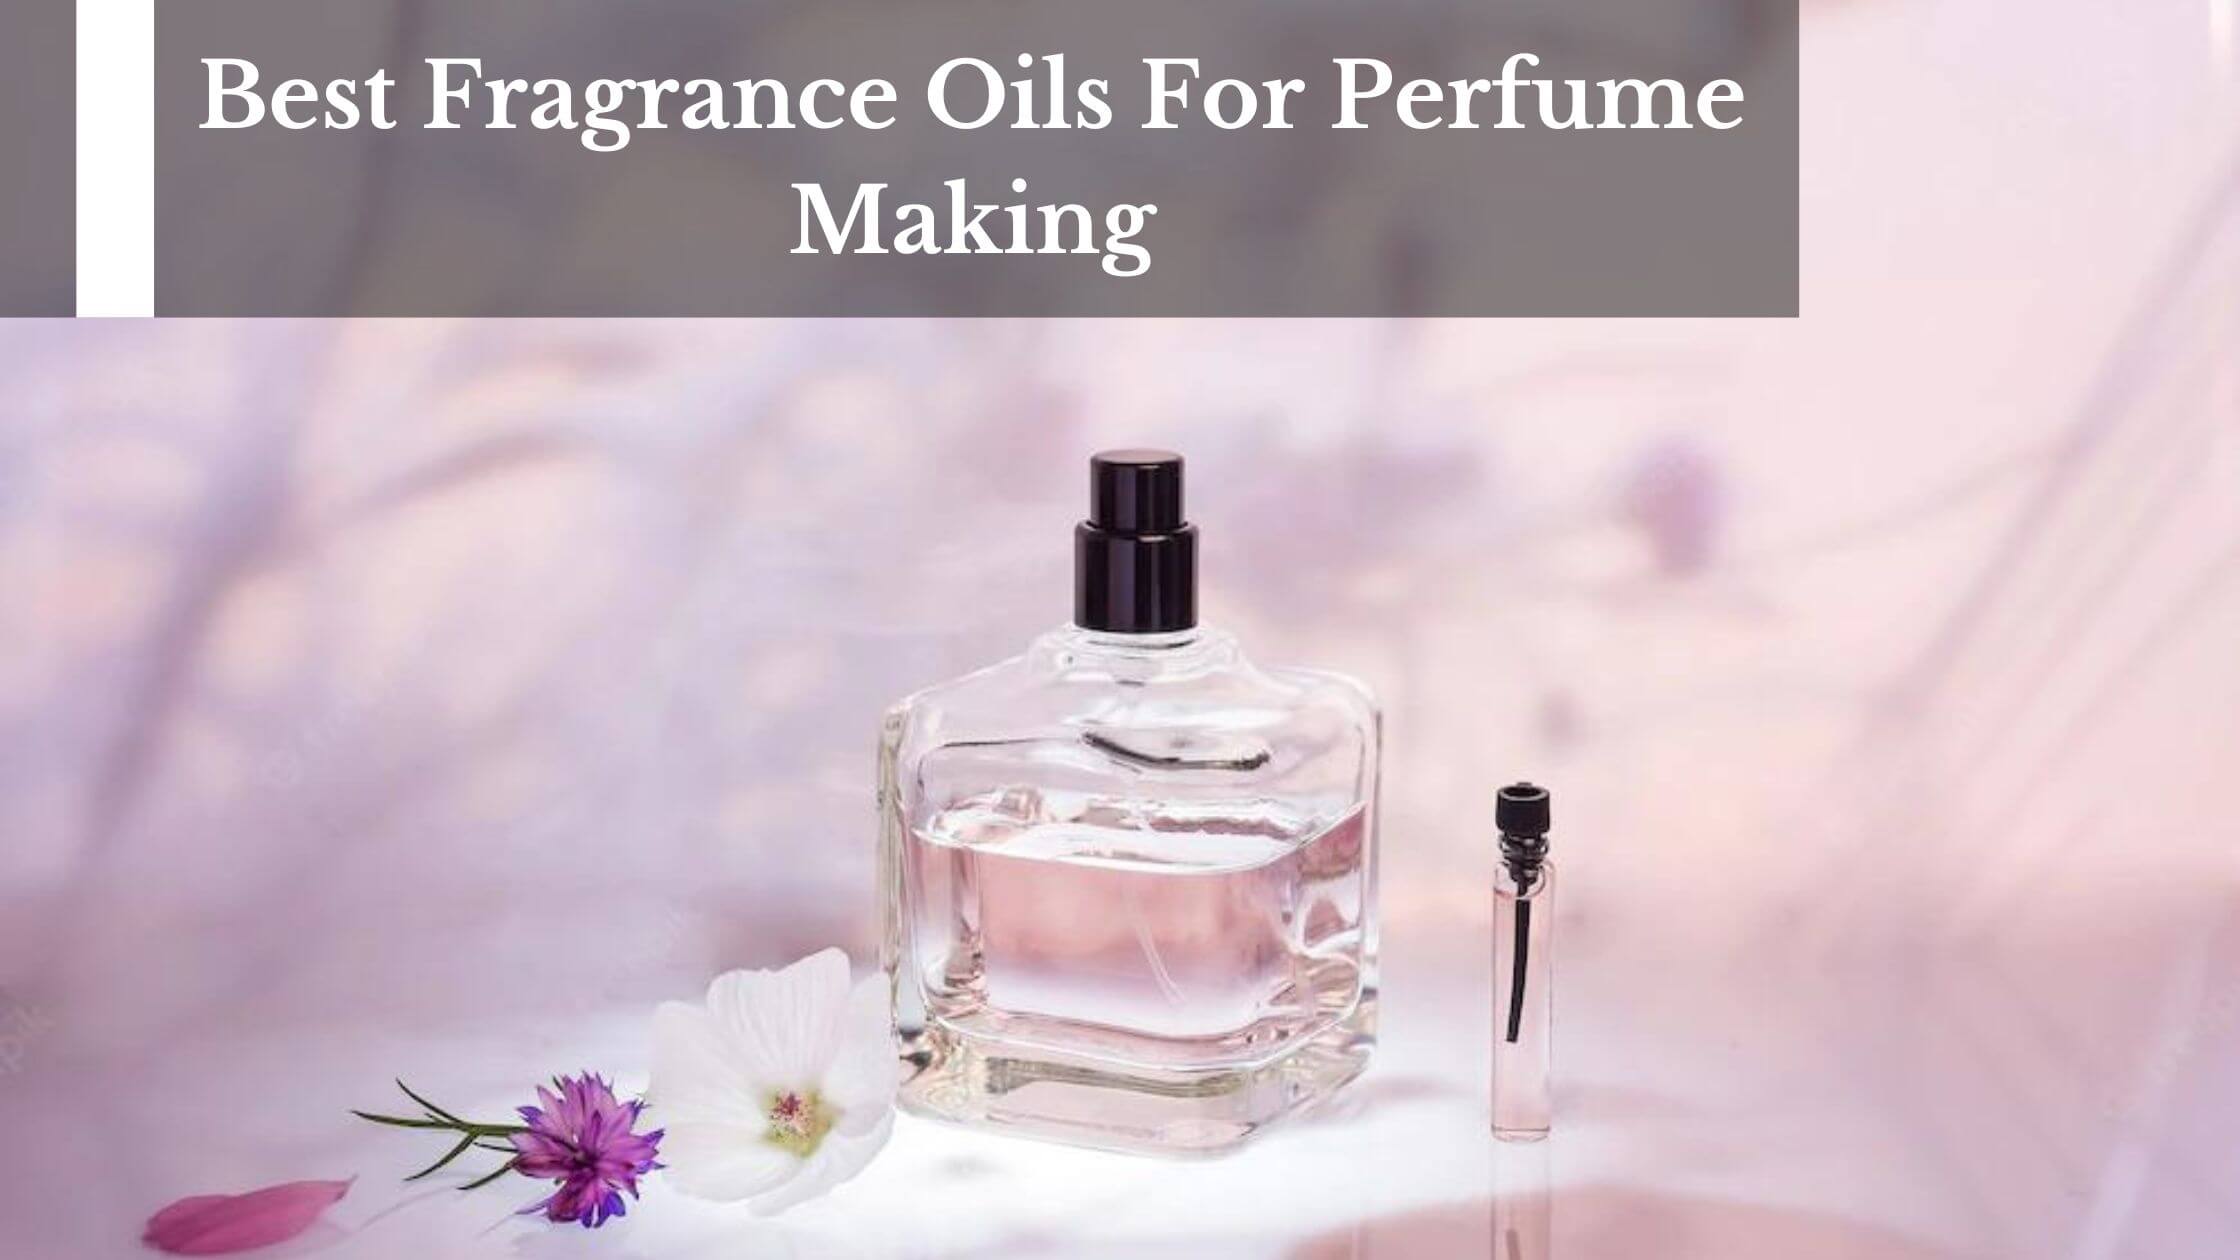 candle fragrance oil use in cologne making : r/DIYfragrance